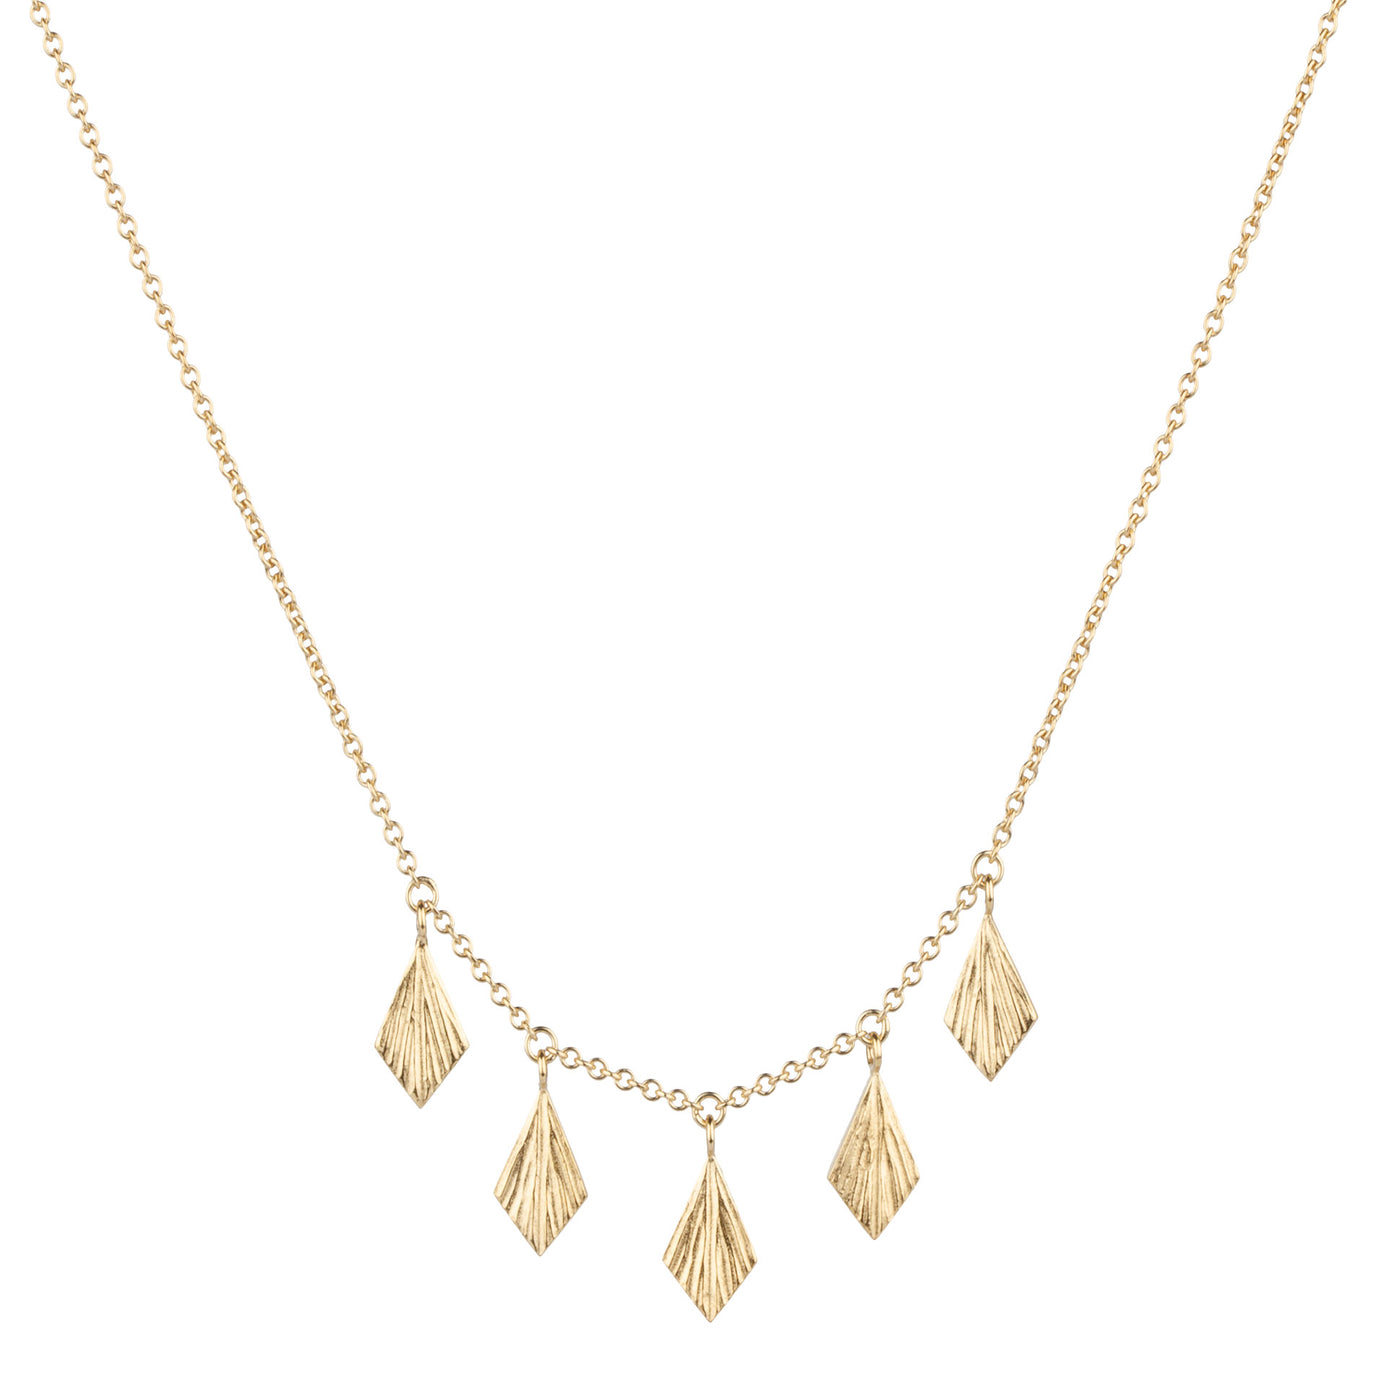 layering bib necklace with five flame fan dangles in gold vermeil on a white background